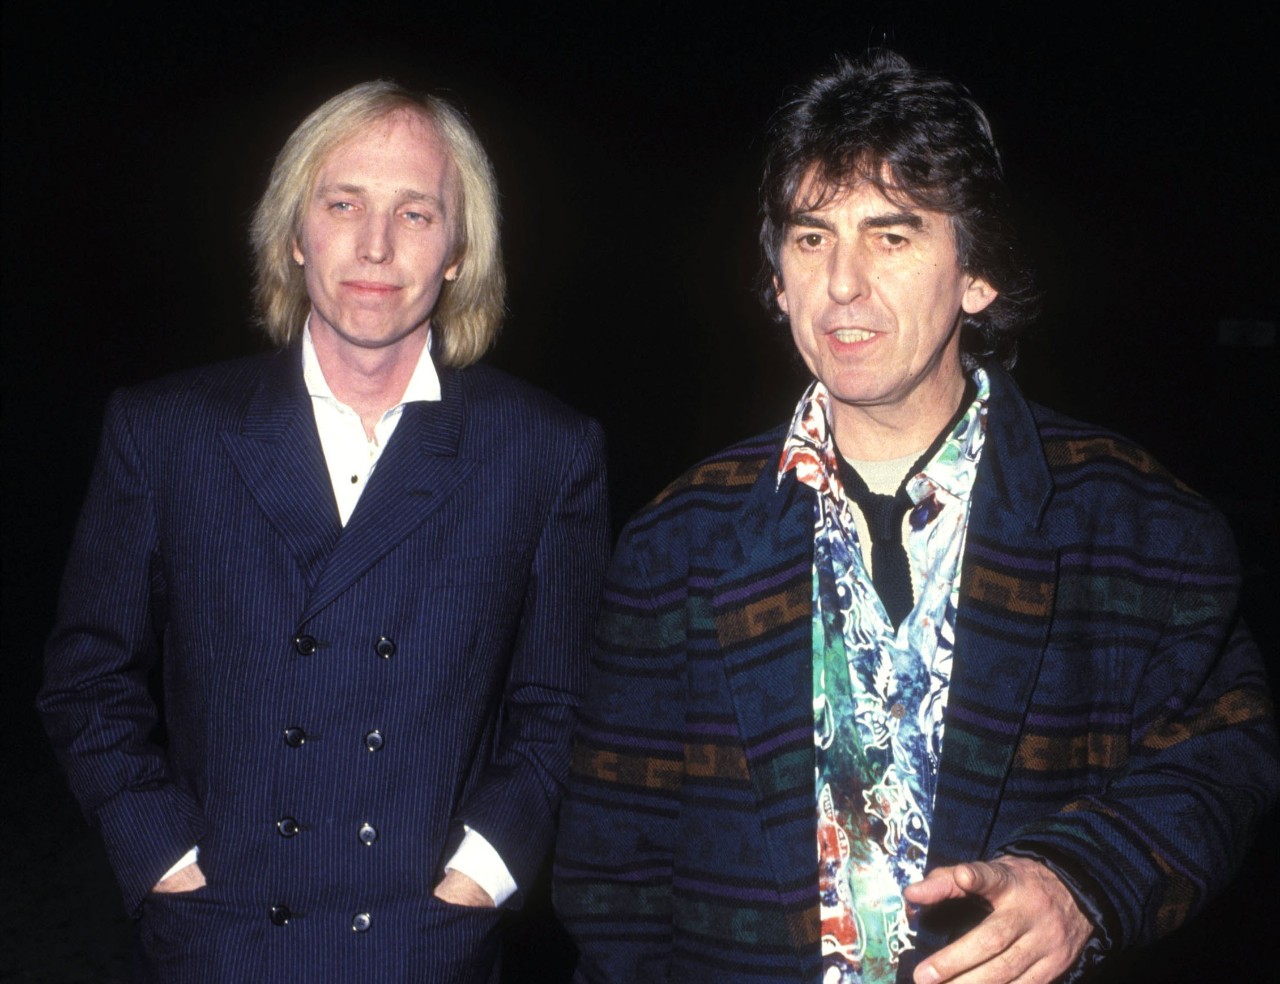 Tom Petty and George Harrison during George Harrison File Photos, 1992 in Los Angeles, California, United States. (Photo by SGranitz/WireImage)